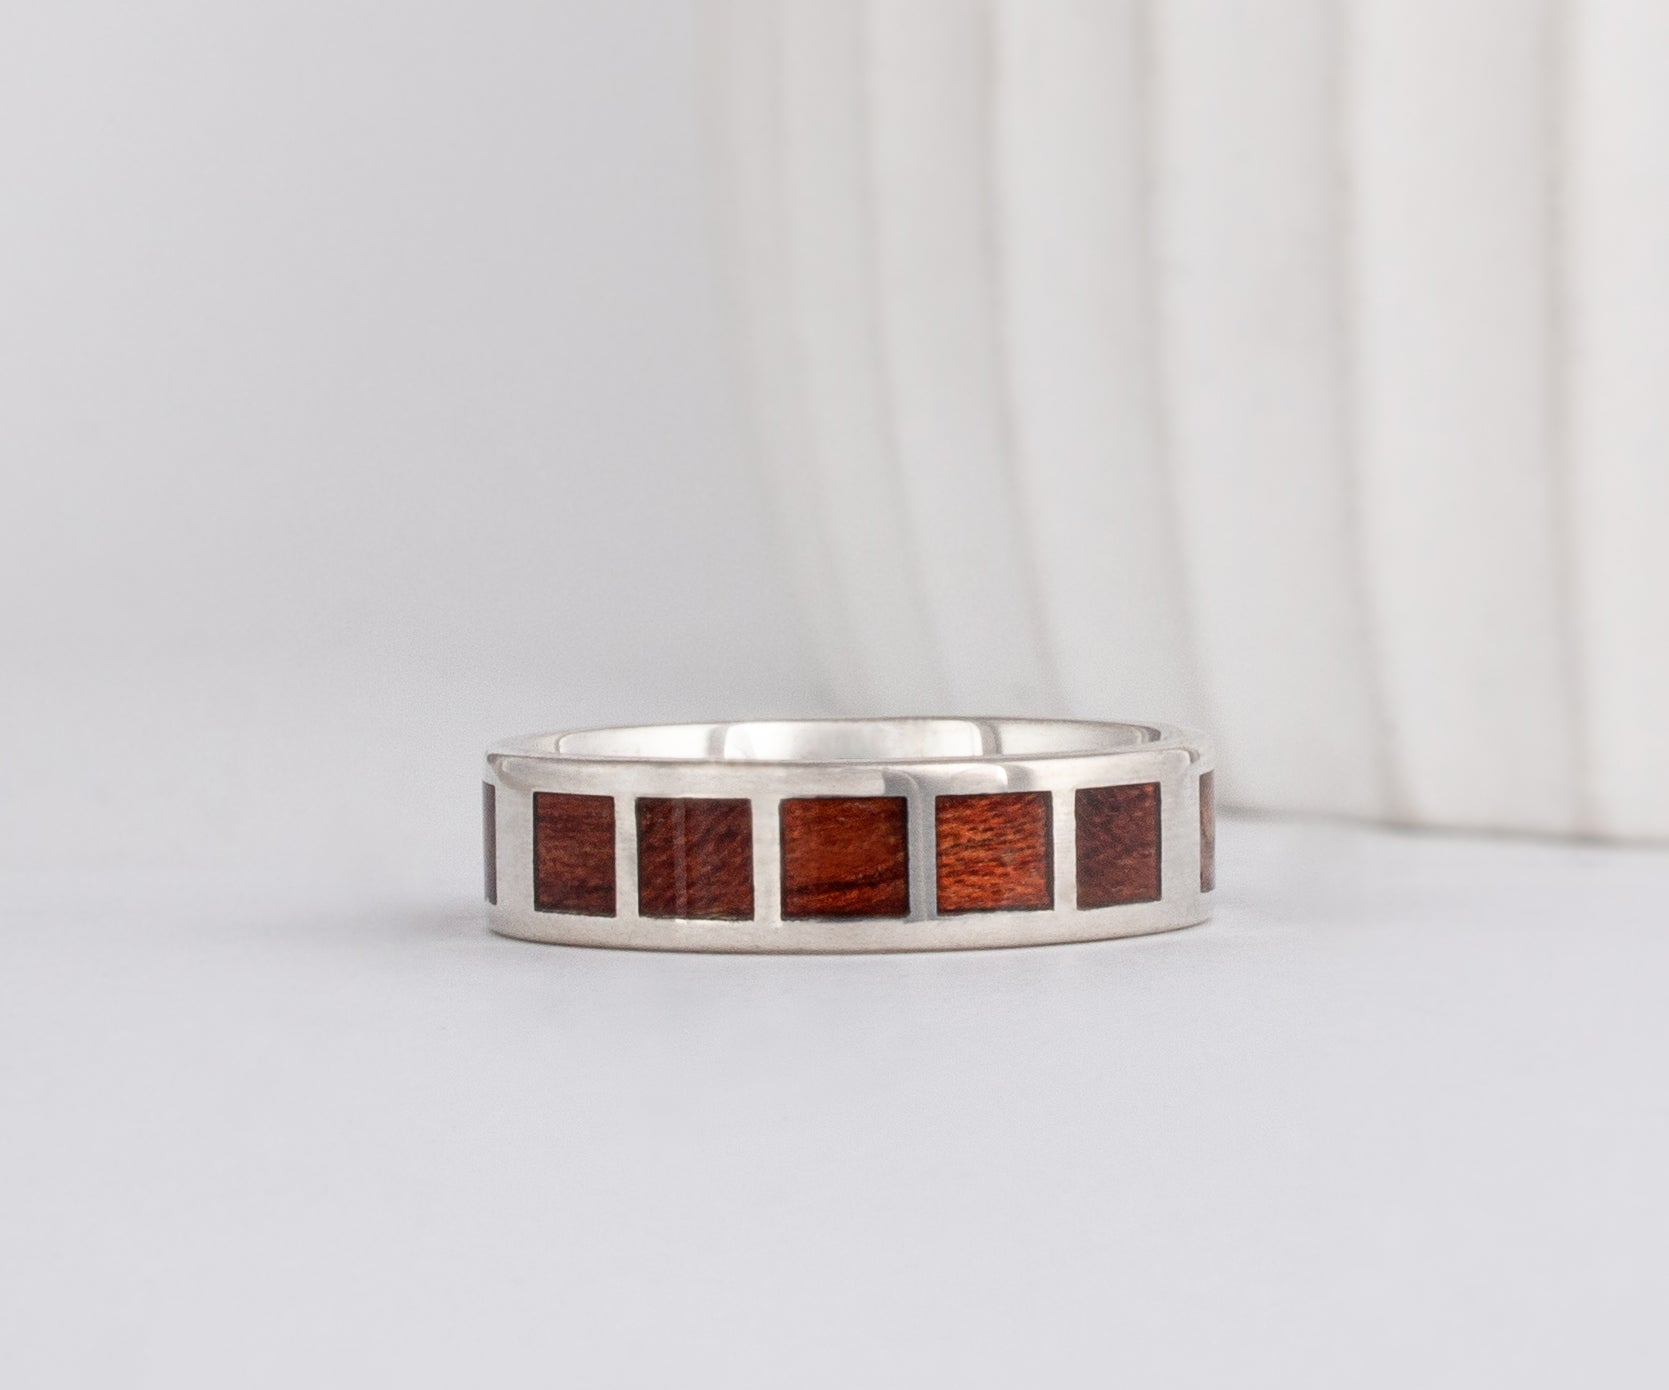 white gold modern flat profile band with Santos rosewood inlay in square patterns around band